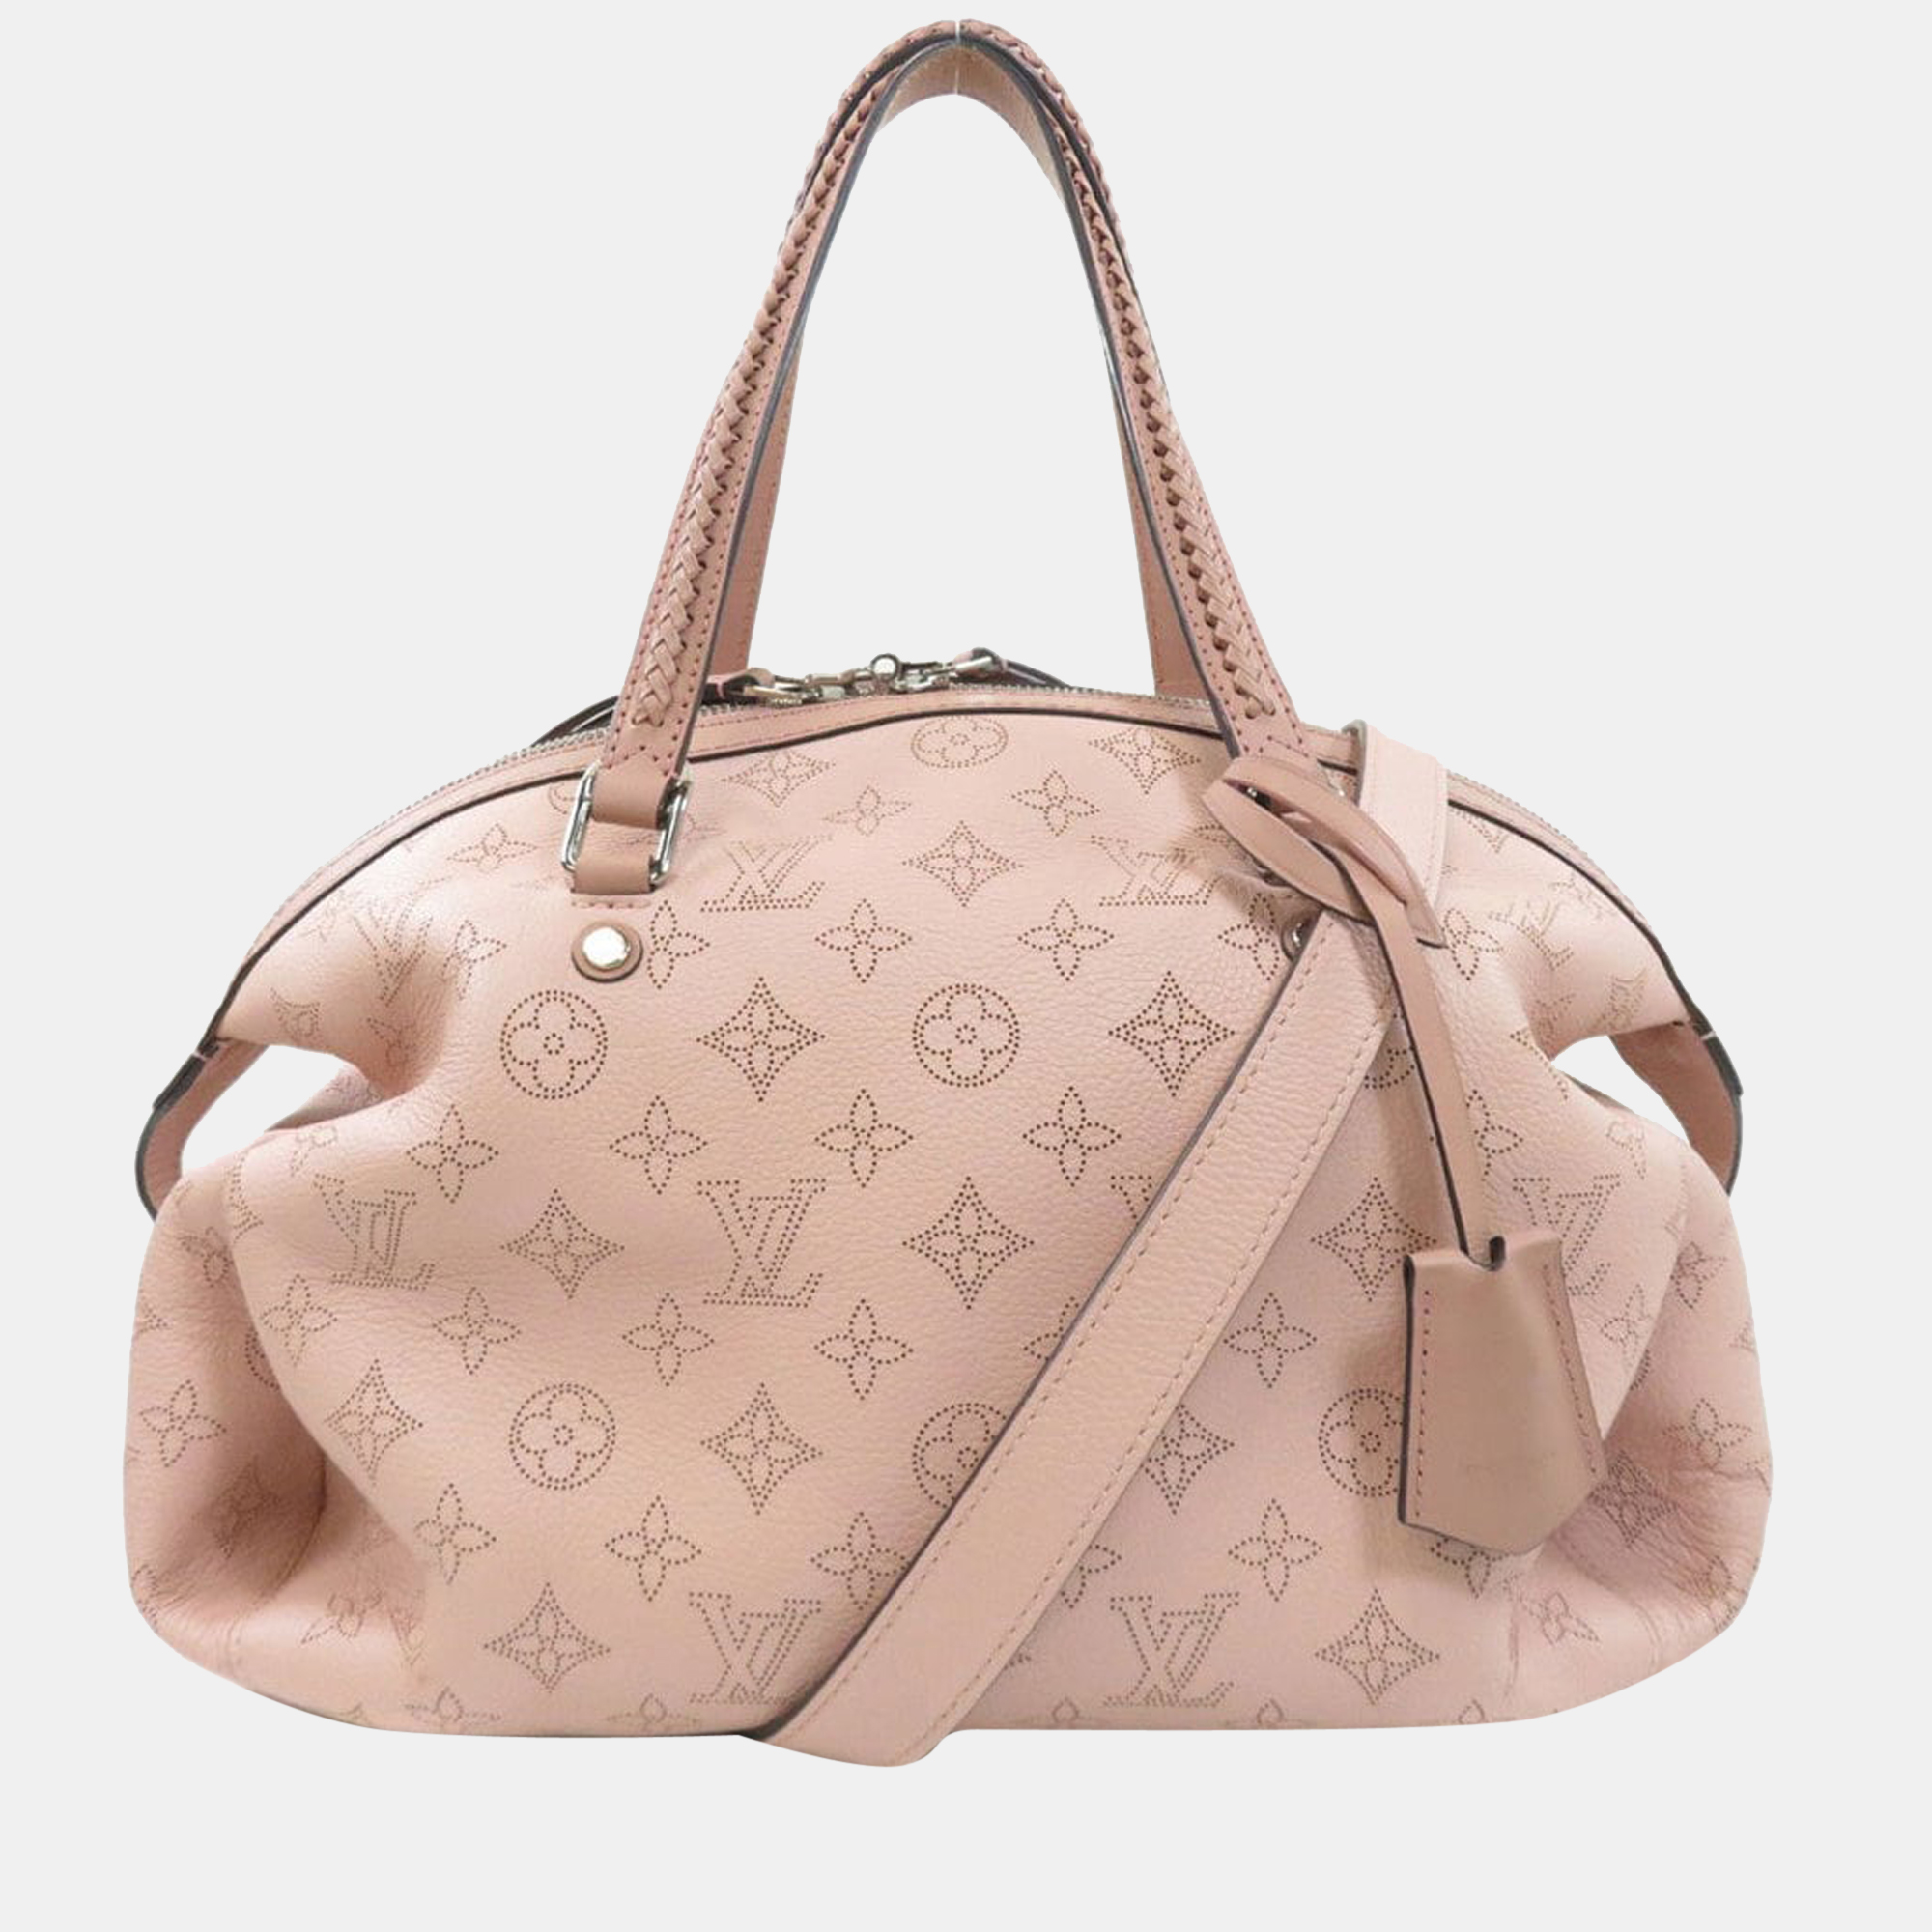 Louis Vuittons handbags are popular owing to their high style and functionality. This bag like all their designs is durable and stylish. Exuding a fine finish the bag is designed to give a luxurious experience.